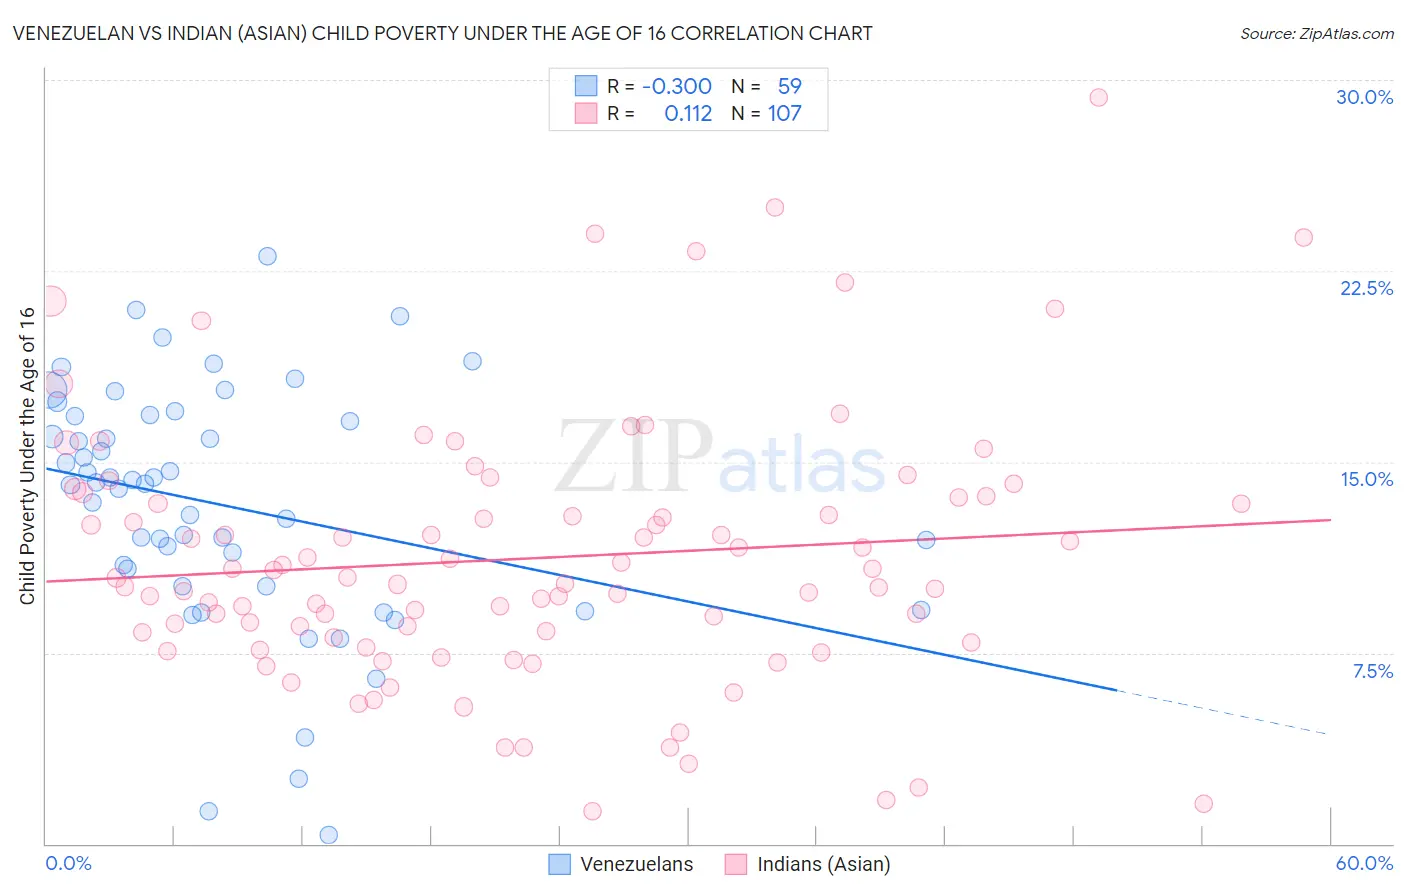 Venezuelan vs Indian (Asian) Child Poverty Under the Age of 16